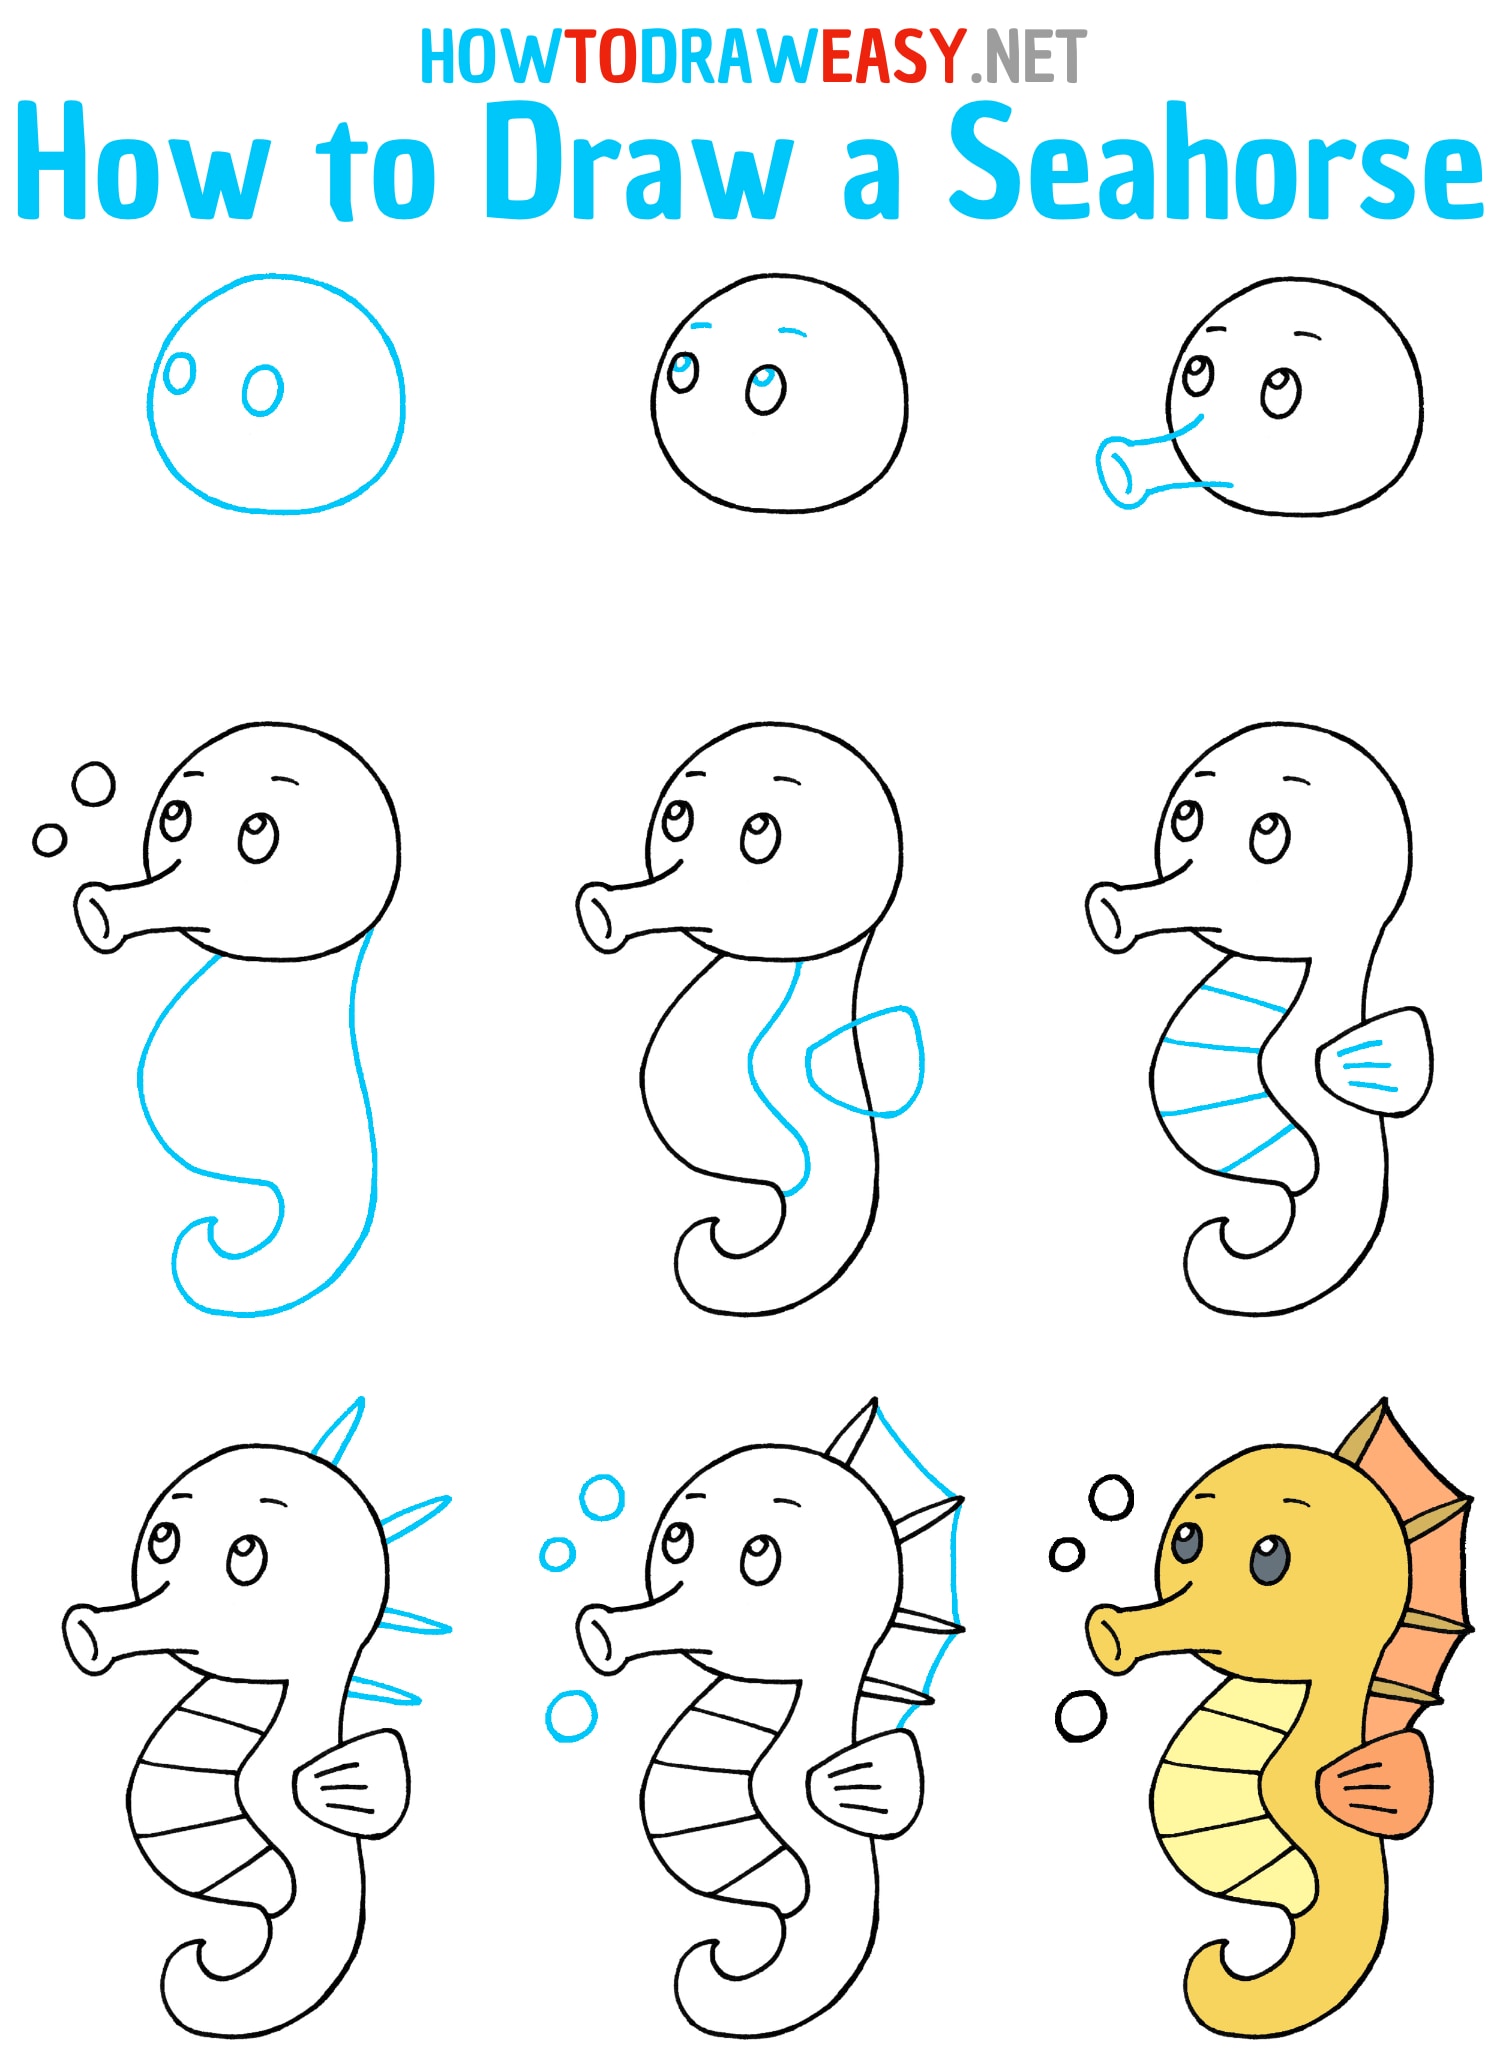 How to Draw a Seahorse Step by Step